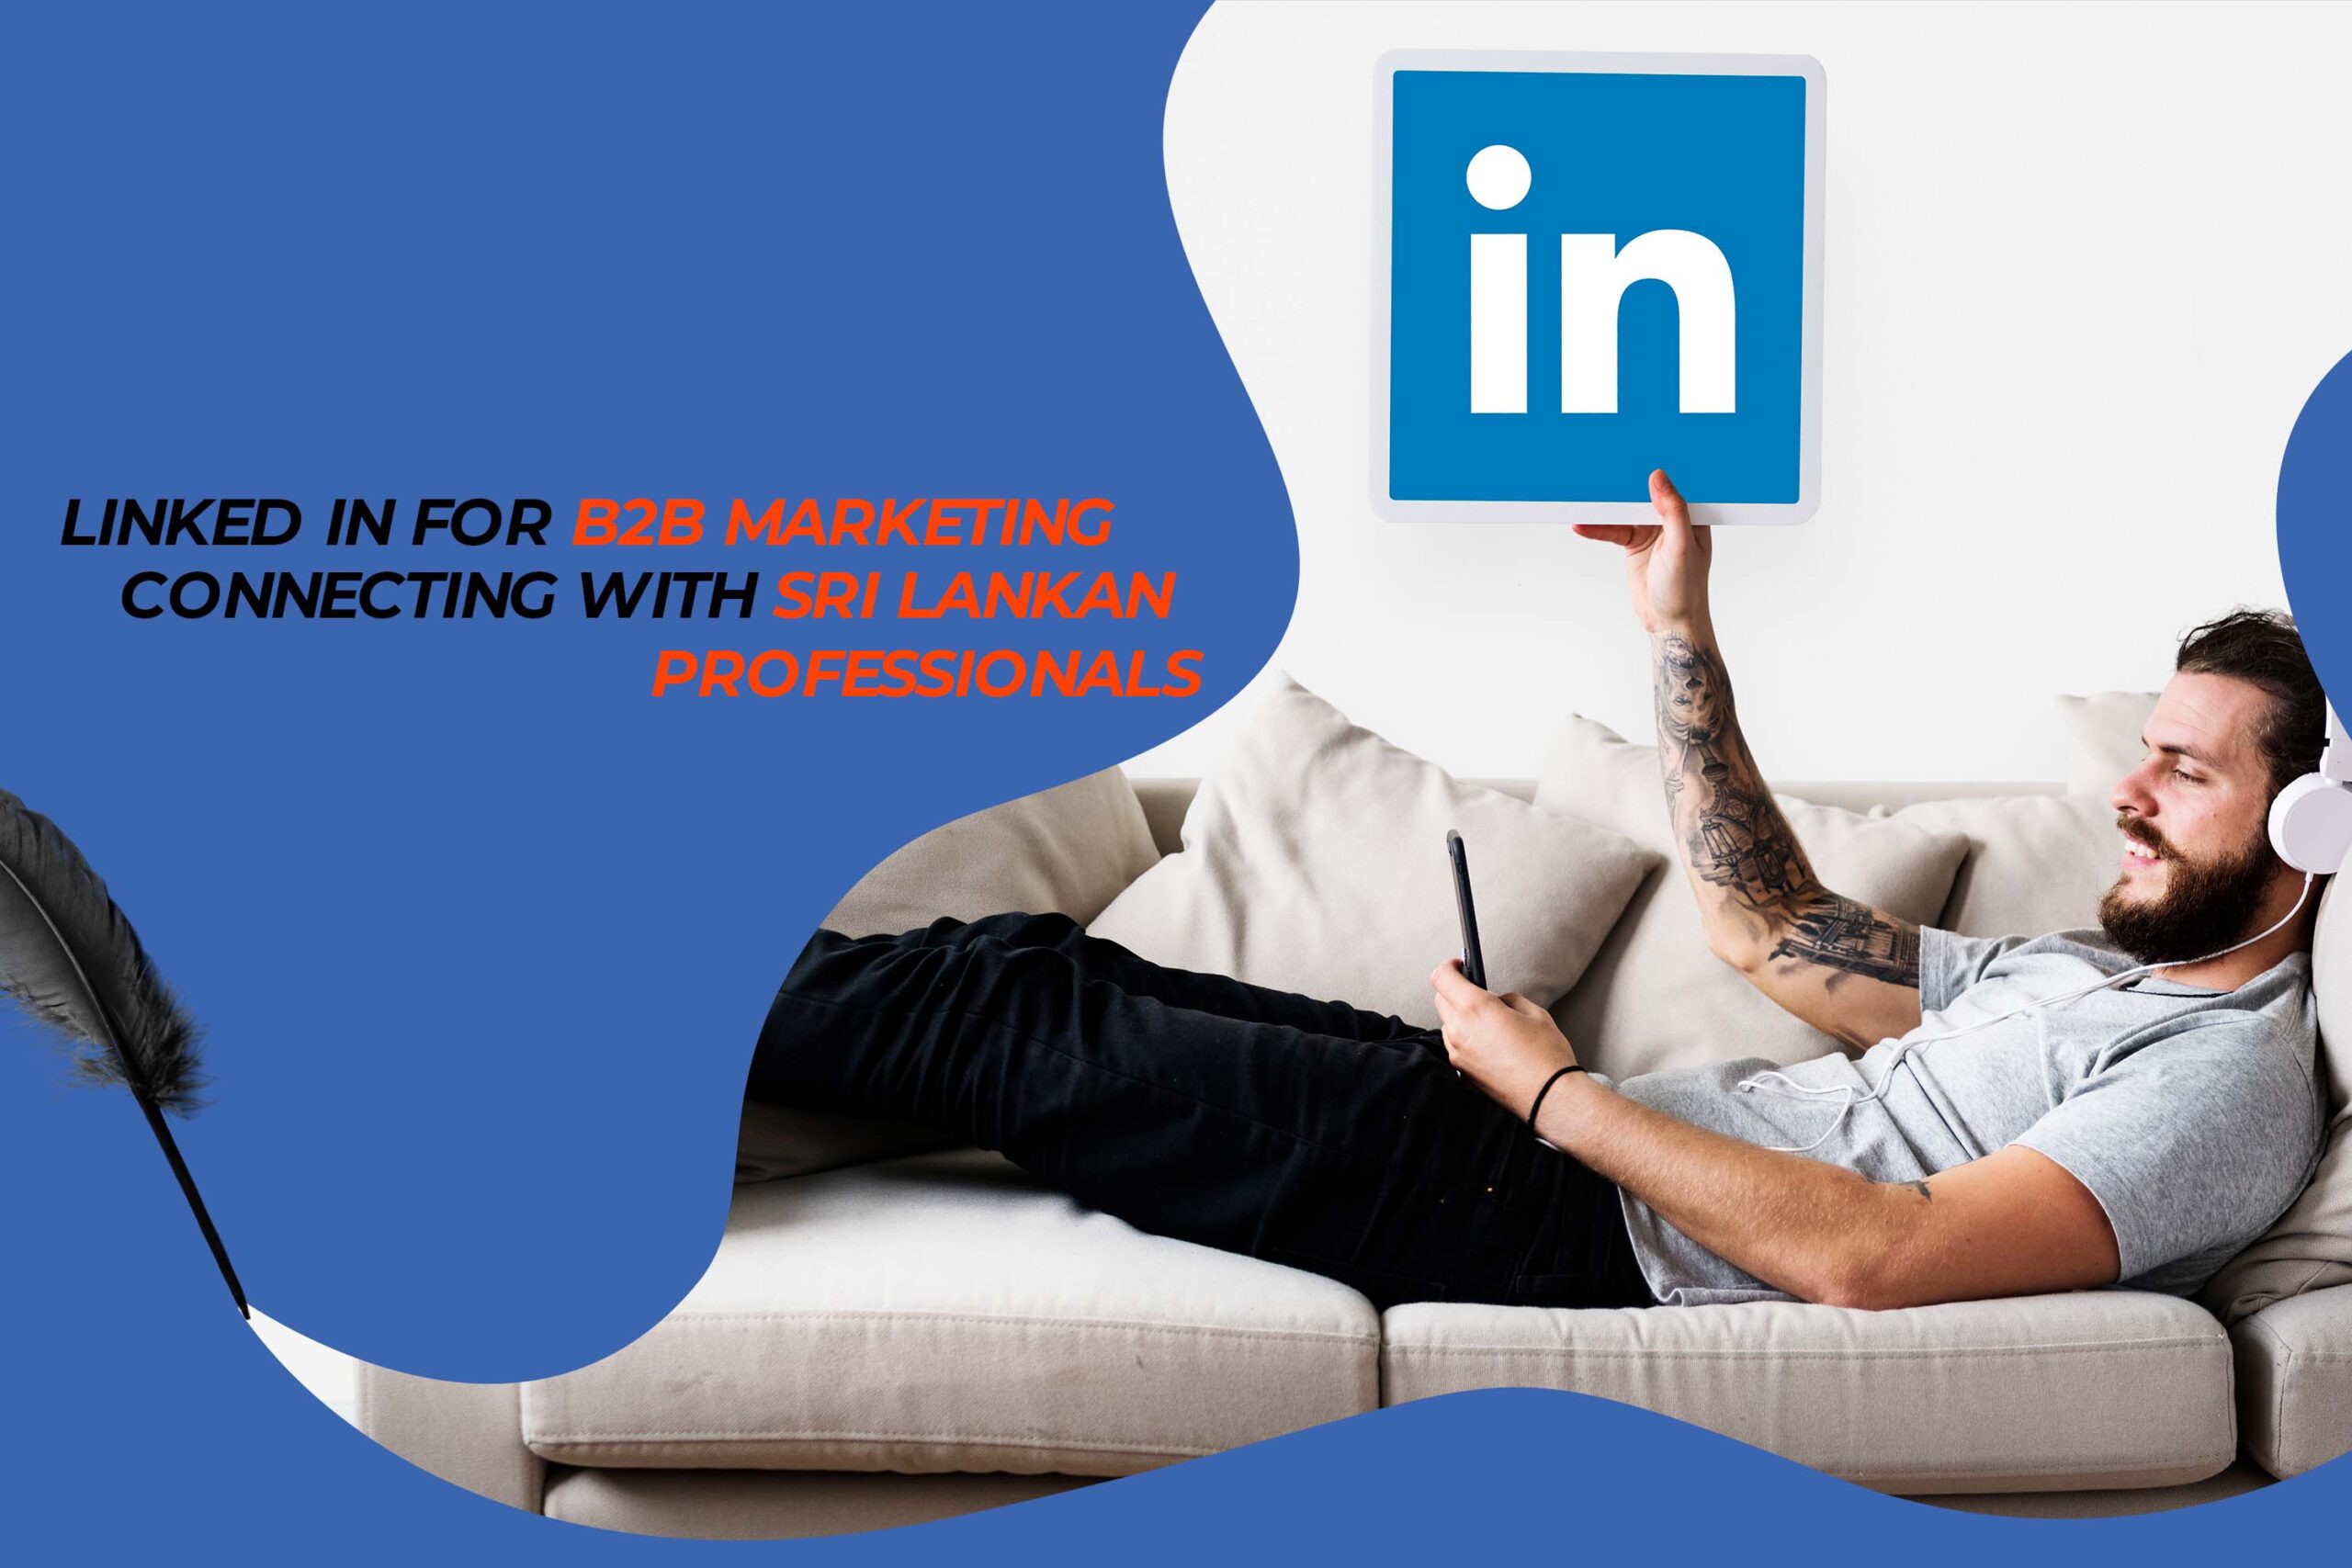 LinkedIn for B2B Marketing: Connecting with Sri Lankan Professionals